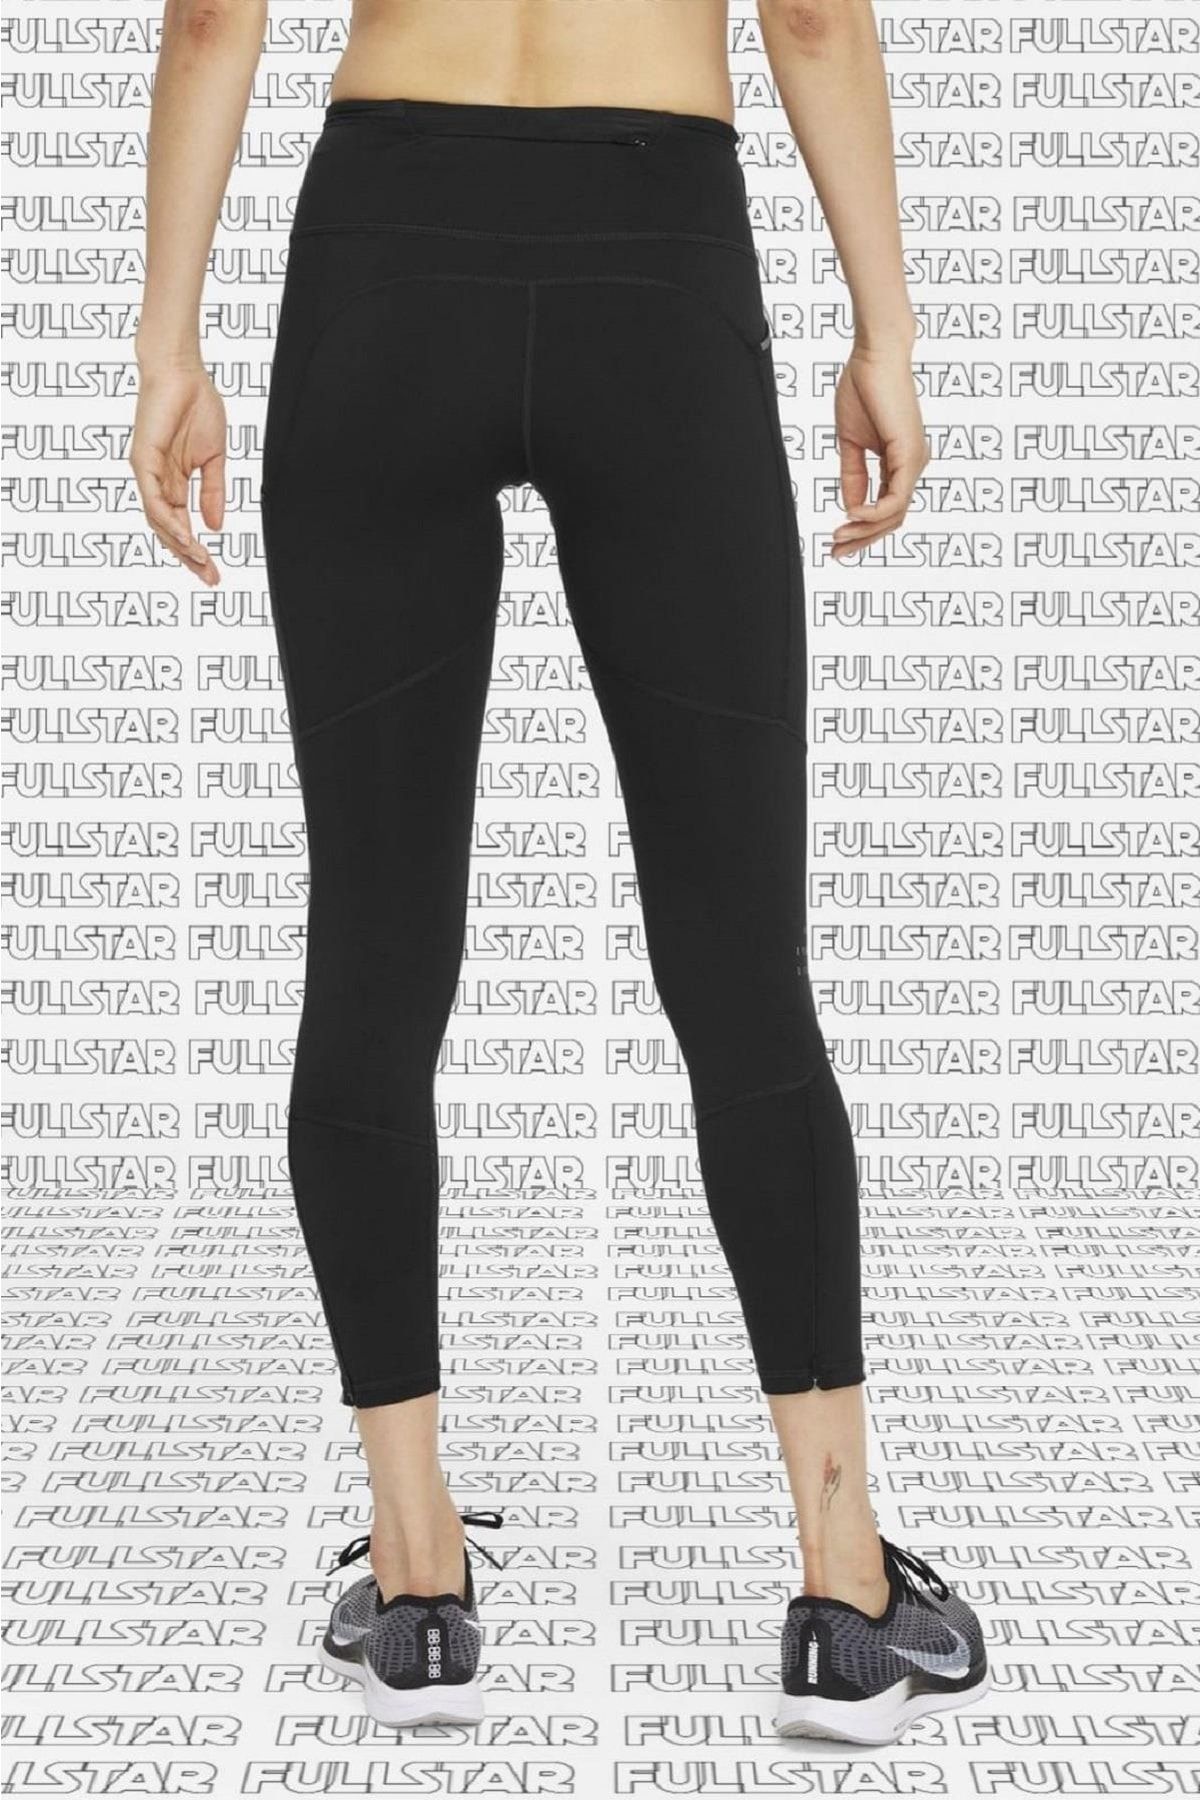 Outdoor Voices, Pants & Jumpsuits, Outdoor Voices Charcoal Warmup Leggings